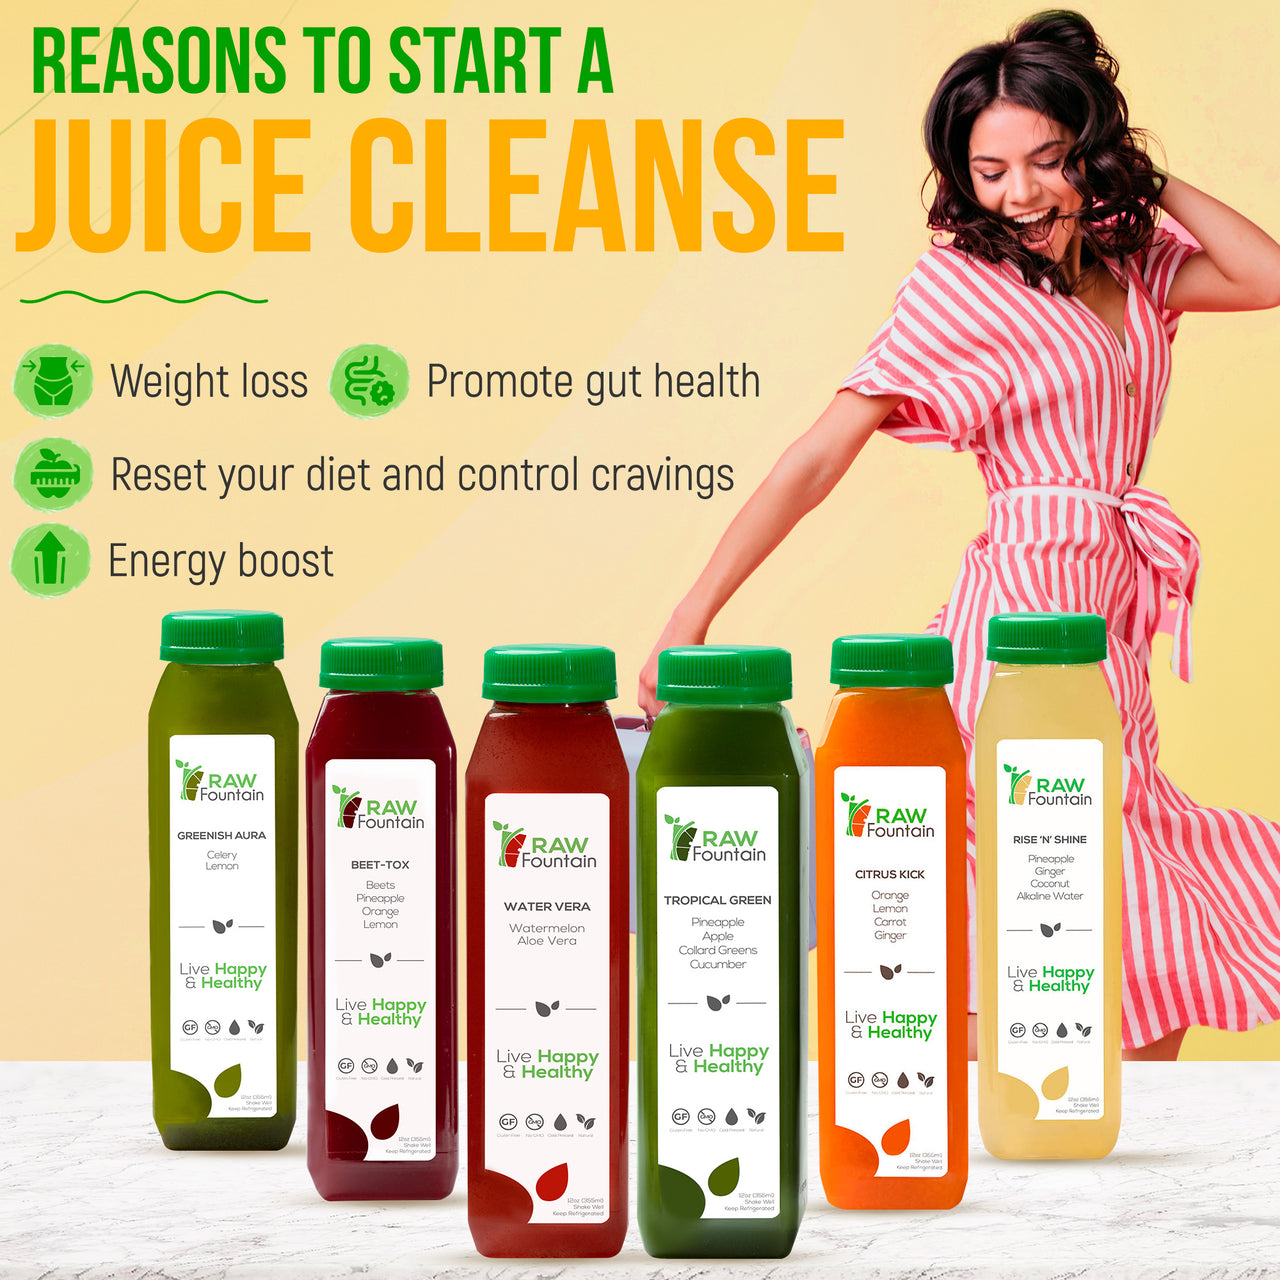 5 Day Tropical Juice Cleanse | All Natural Raw and Cold Pressed | 30 Bottles